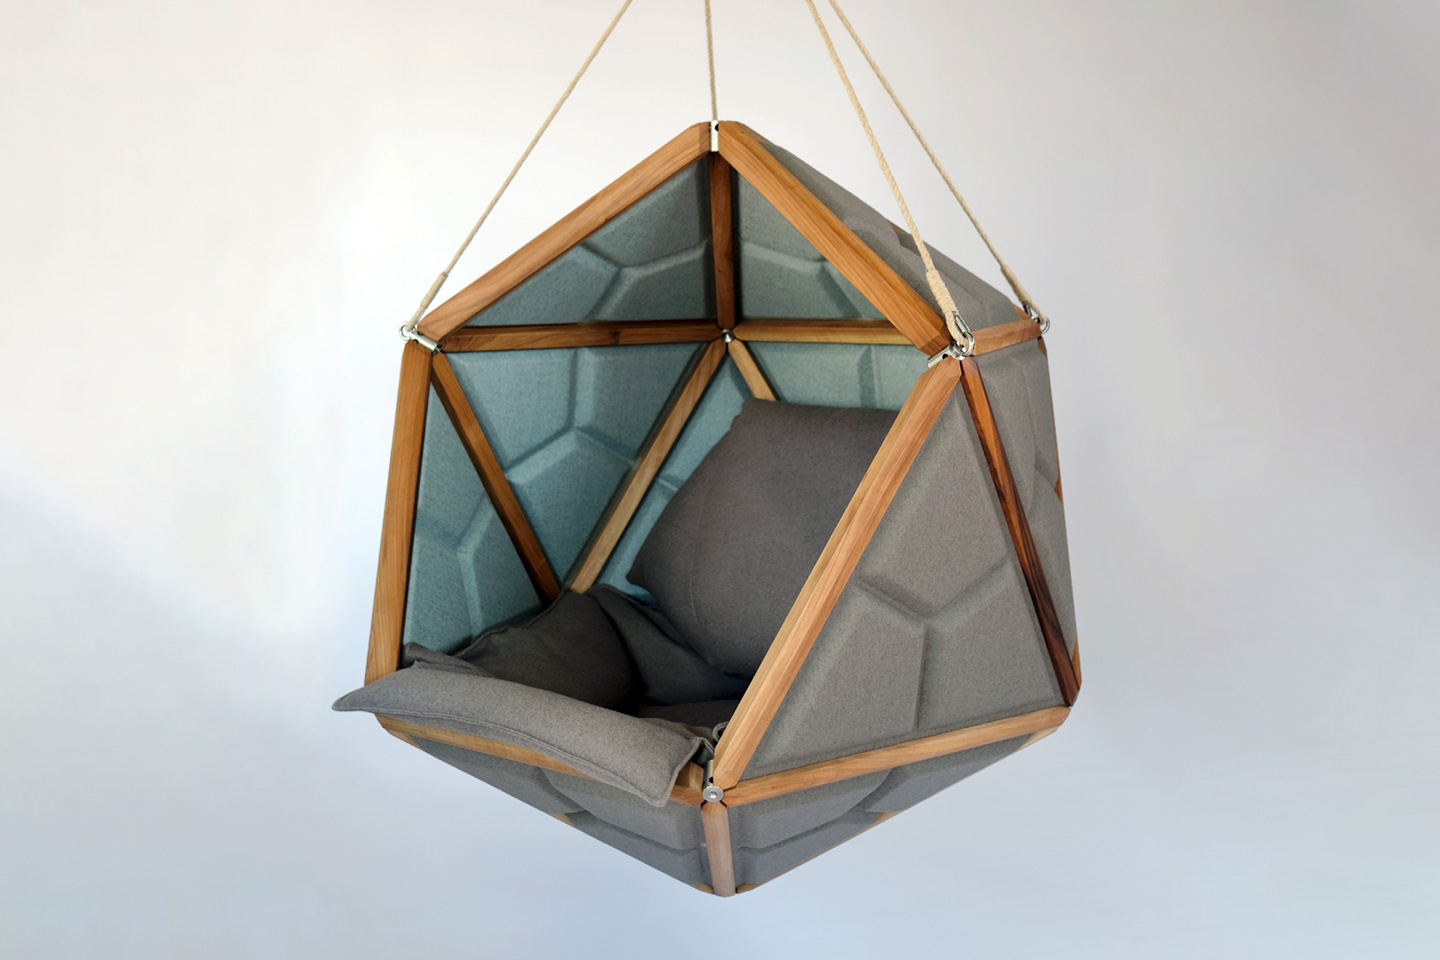 #Sustainably made geometric hanging chair gives you a peaceful zen zone within your home or office